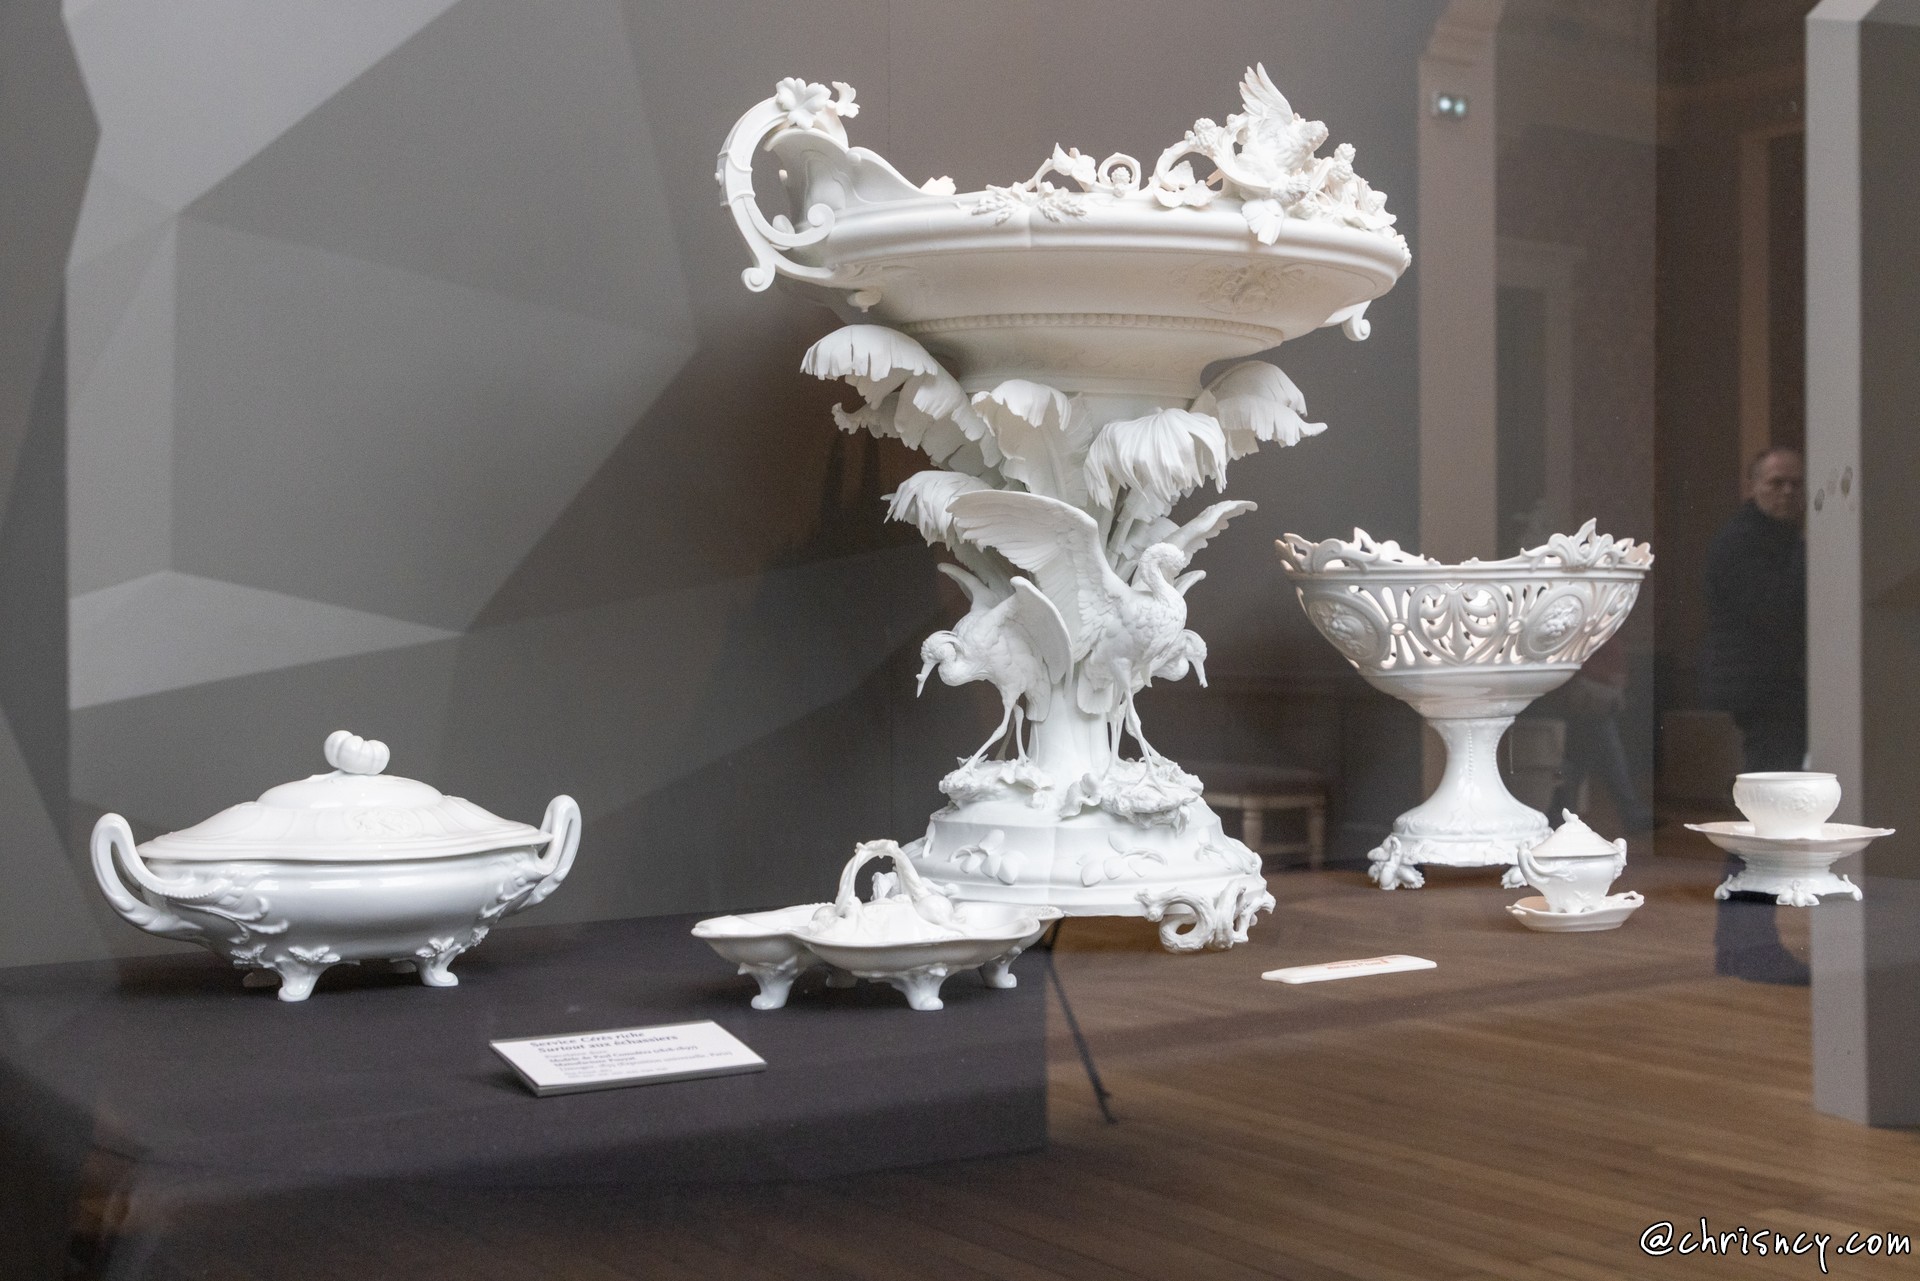 20240424-1351-Limoges_musee_dubouche_porcelaine.jpg